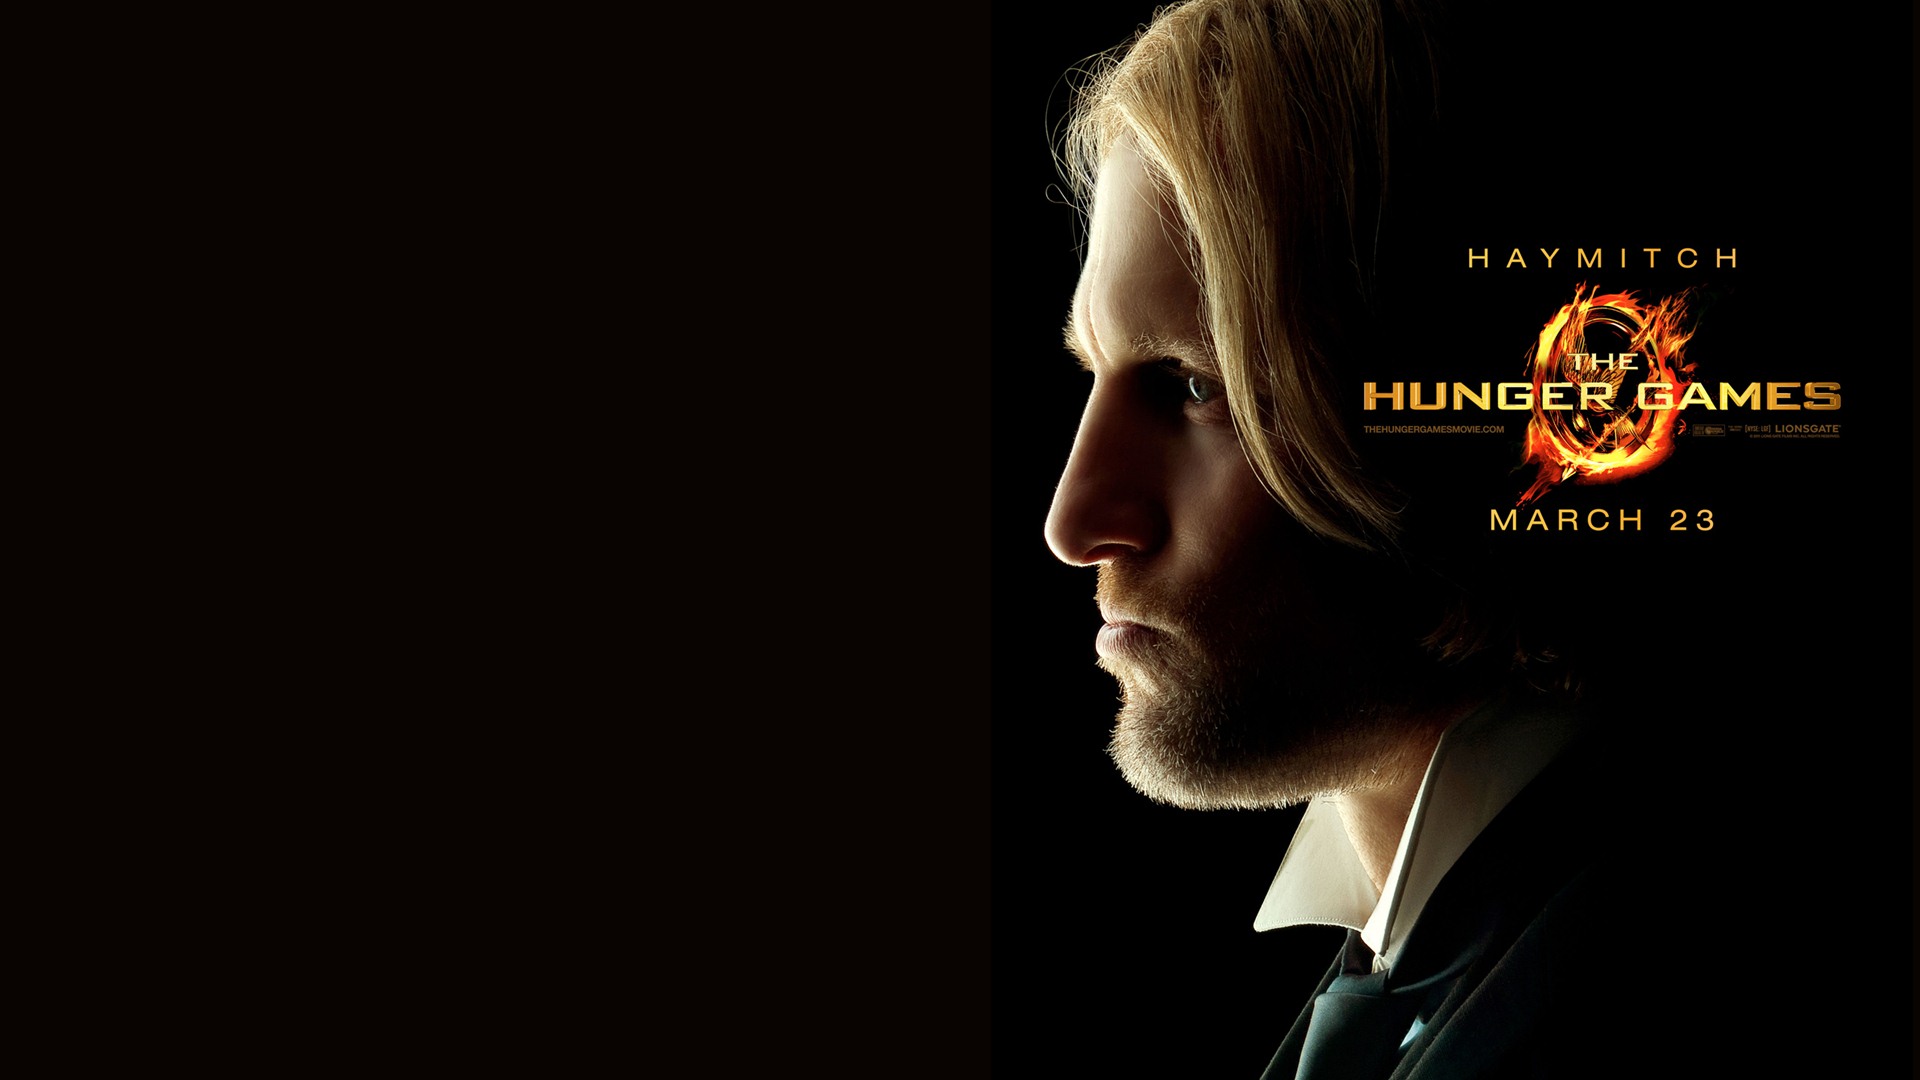 The Hunger Games HD wallpapers #12 - 1920x1080